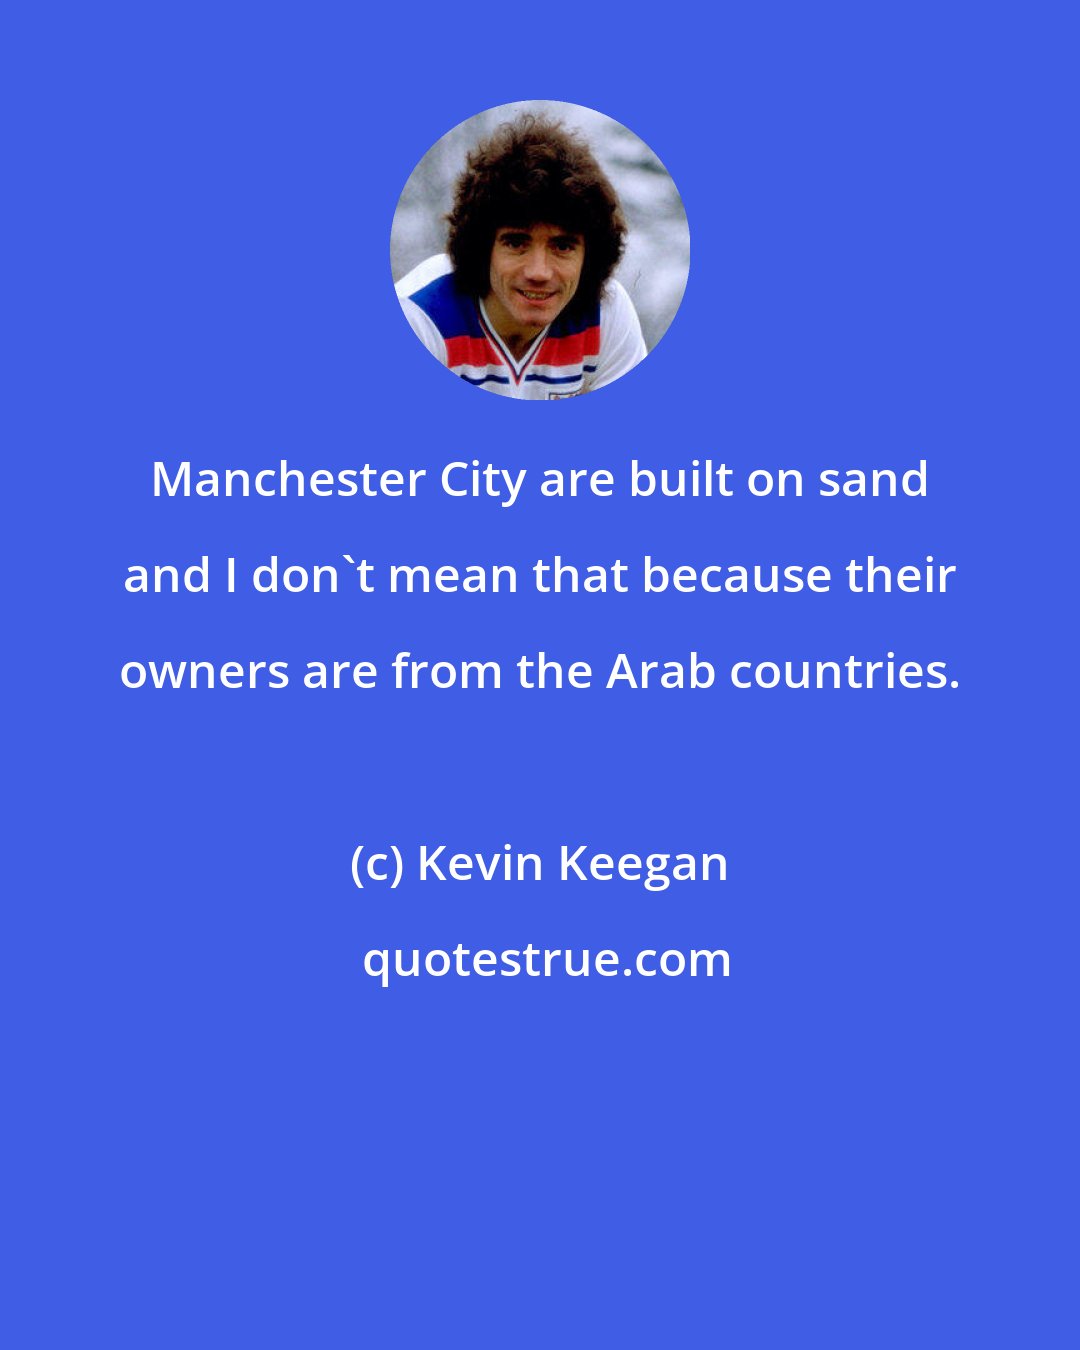 Kevin Keegan: Manchester City are built on sand and I don't mean that because their owners are from the Arab countries.